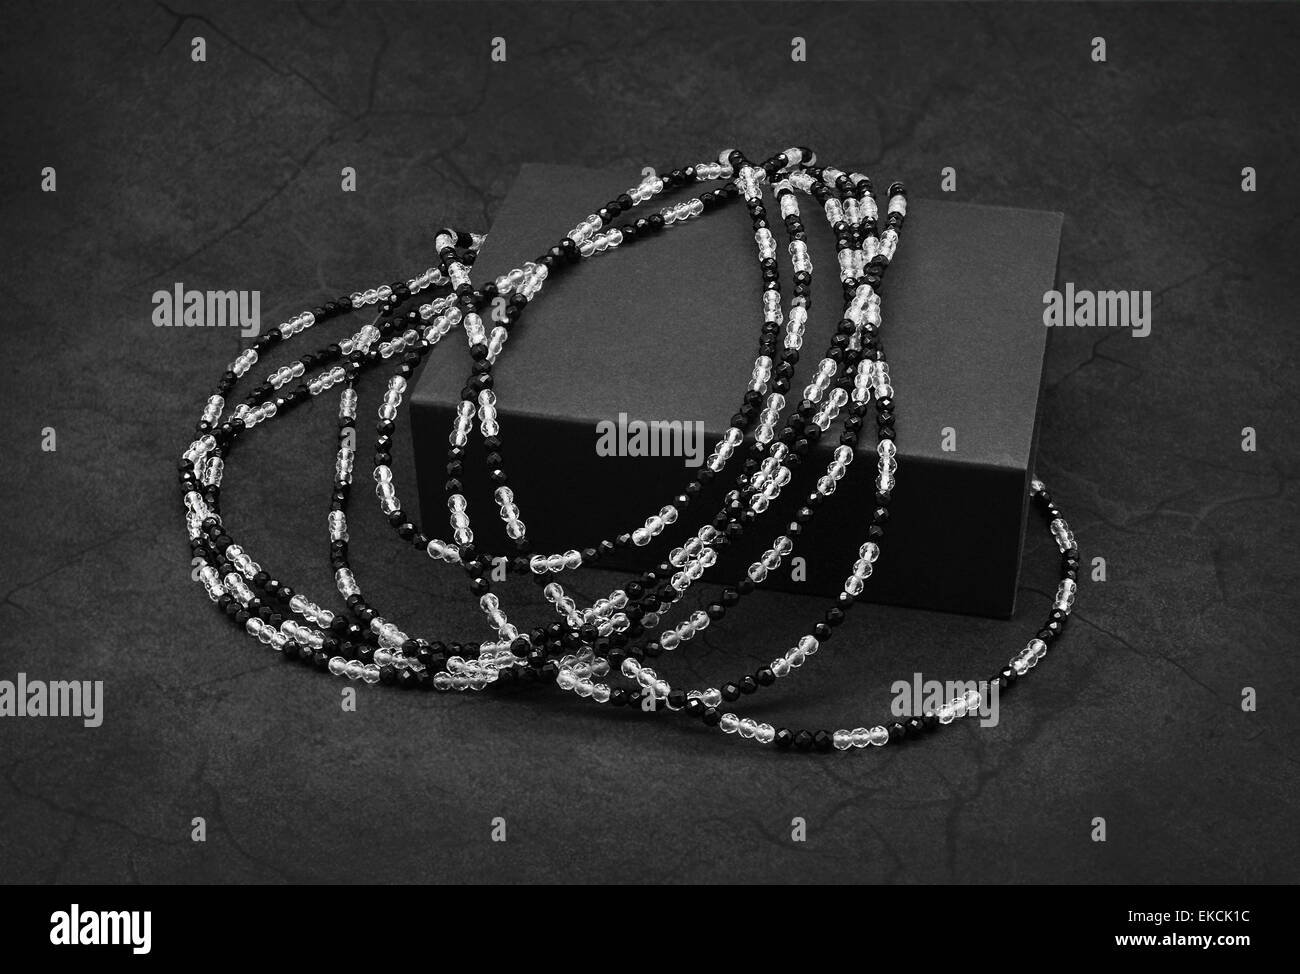 Black and white beads on the cracked dark gray background. Stock Photo